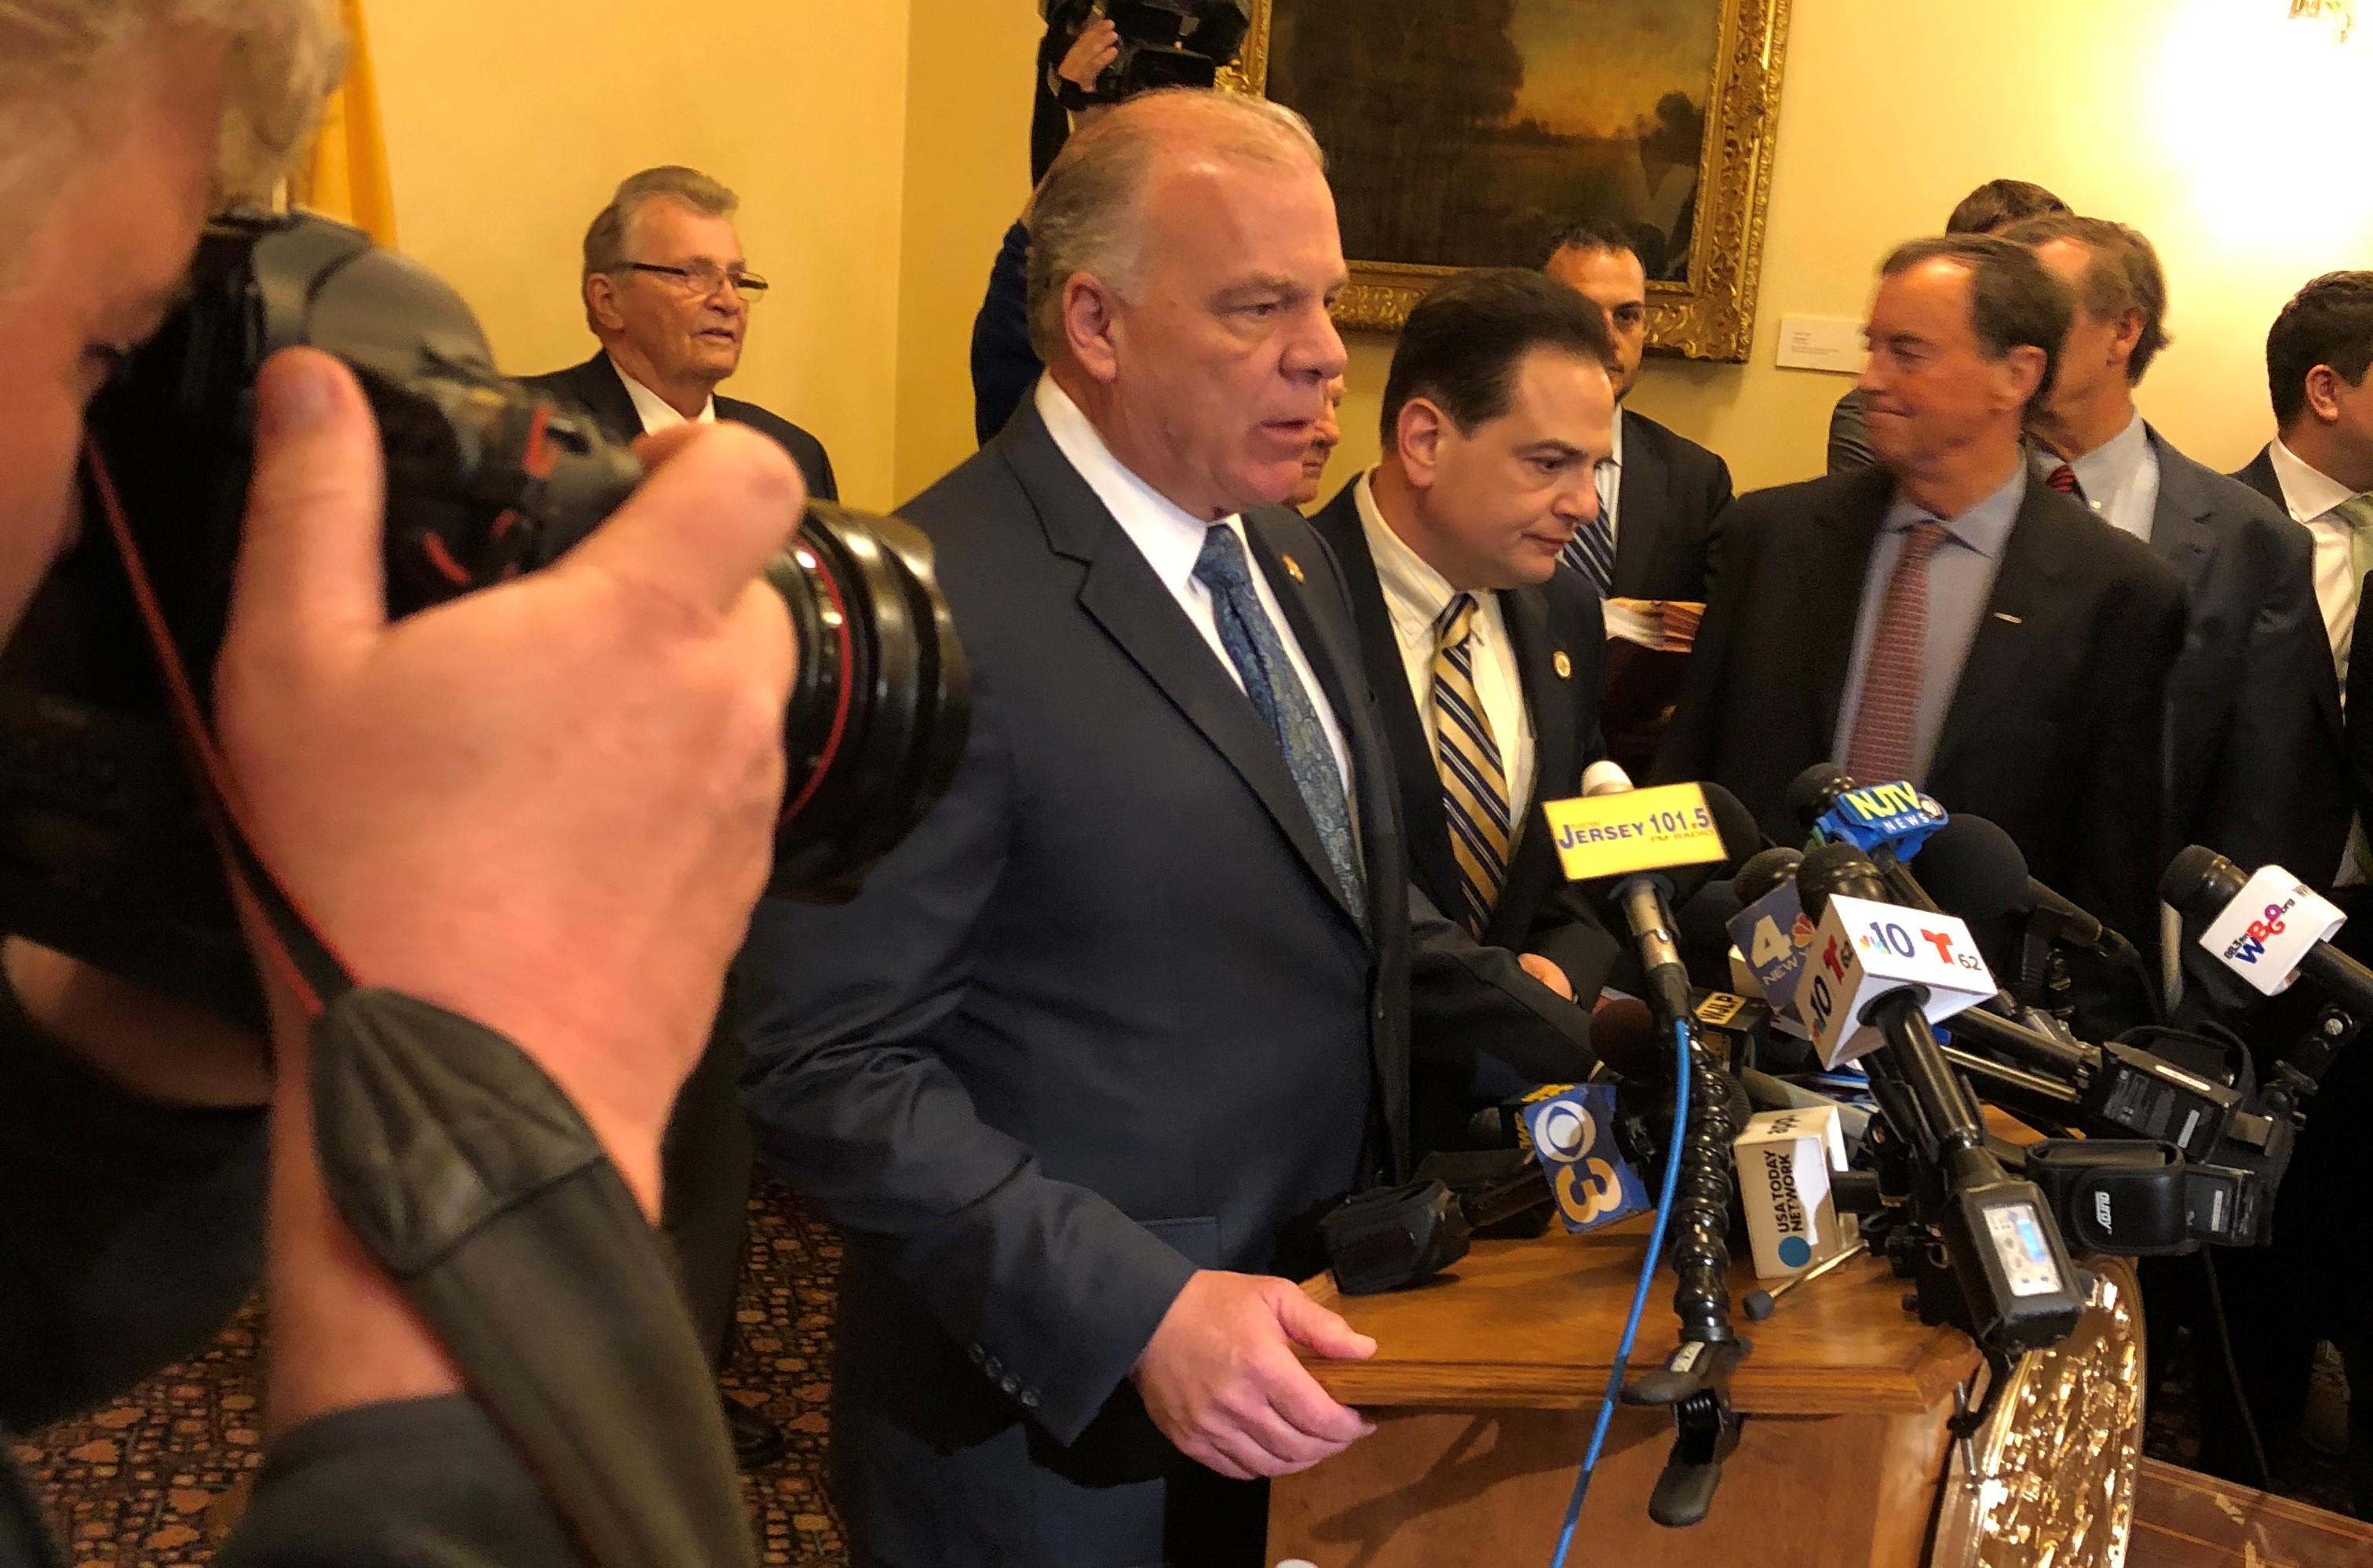 Senate President Steve Sweeney appointed the members of the bipartisan Senate Select Committee on Economic Growth Strategies, which will review the NJEDA and its tax incentive programs, getting a true accounting of the aspects of each program and how these programs may be improved in the future.